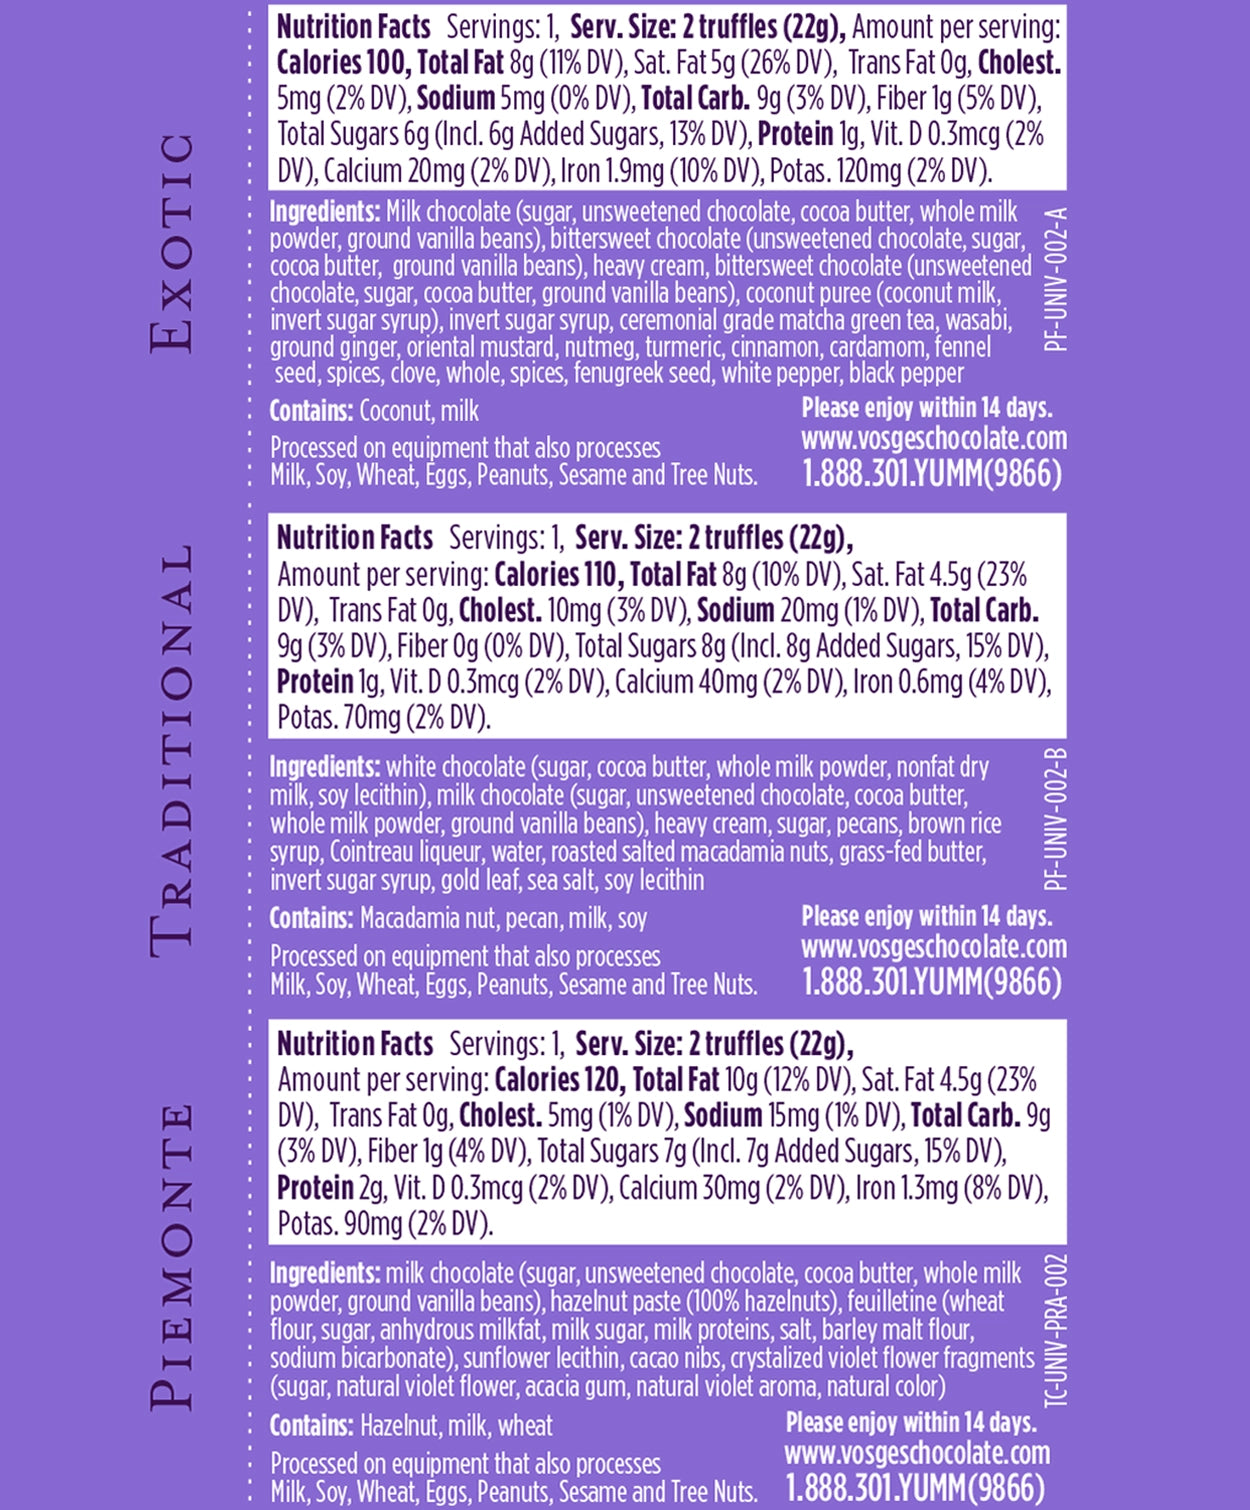 Nutrition Facts and Ingredients of Vosges Haut-Chocolat Exotic, Traditional and Vegan two-piece Chocolate Truffle Collection printed in white san-serif font on a dark purple background.